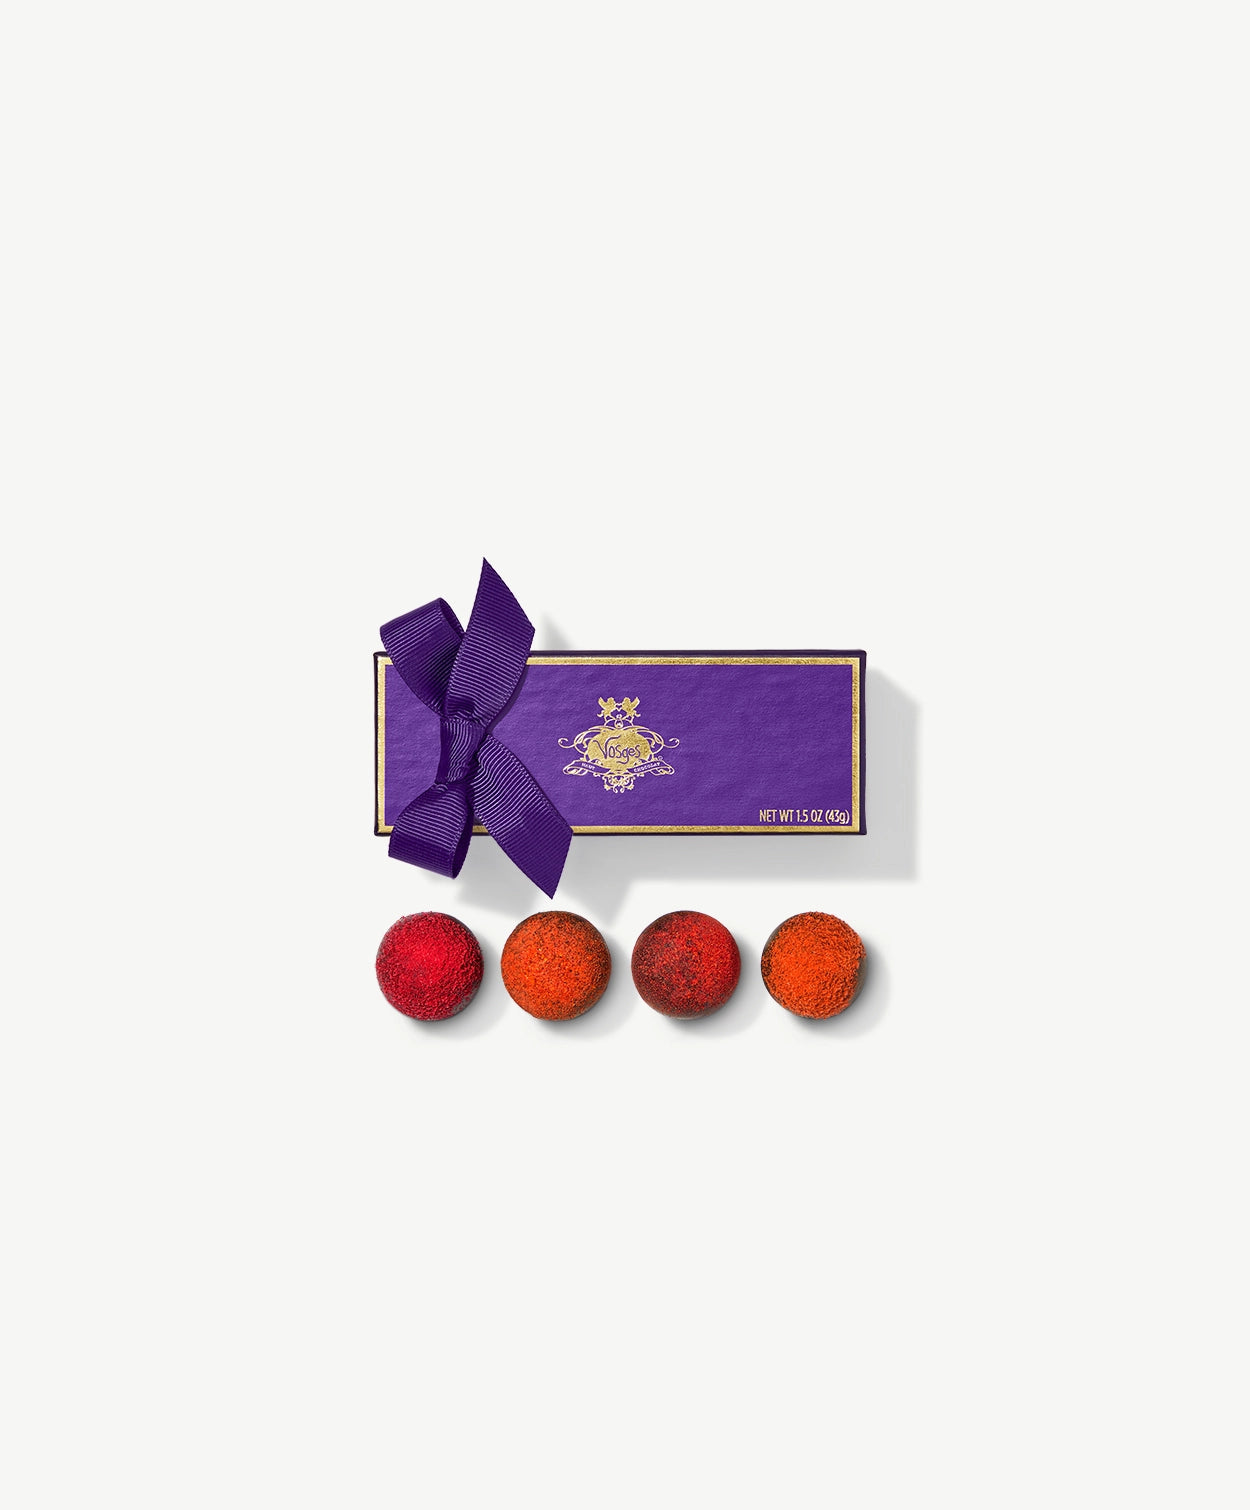 Four Vosges Vegan chocolate truffles adorned with vibrant red raspberry powder and orange powder sit infront a rectangular purple candy box embossed with gold foil tied with a purple ribbon bow on a grey background.